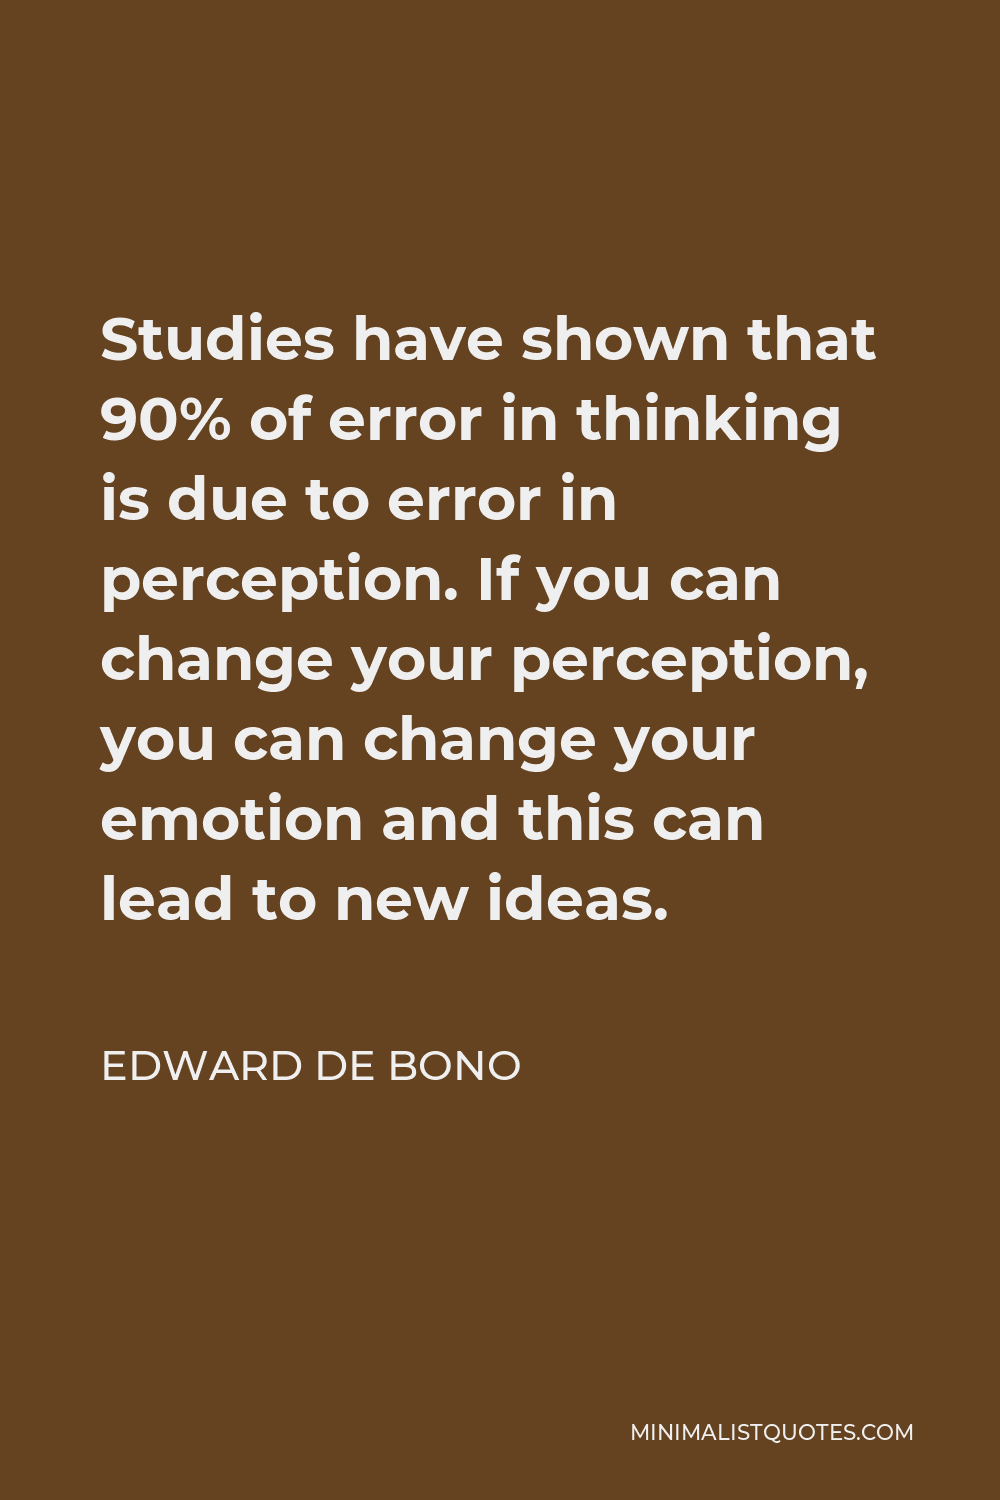 Edward de Bono Quote - Studies have shown that 90% of error in thinking is due to error in perception. If you can change your perception, you can change your emotion and this can lead to new ideas.